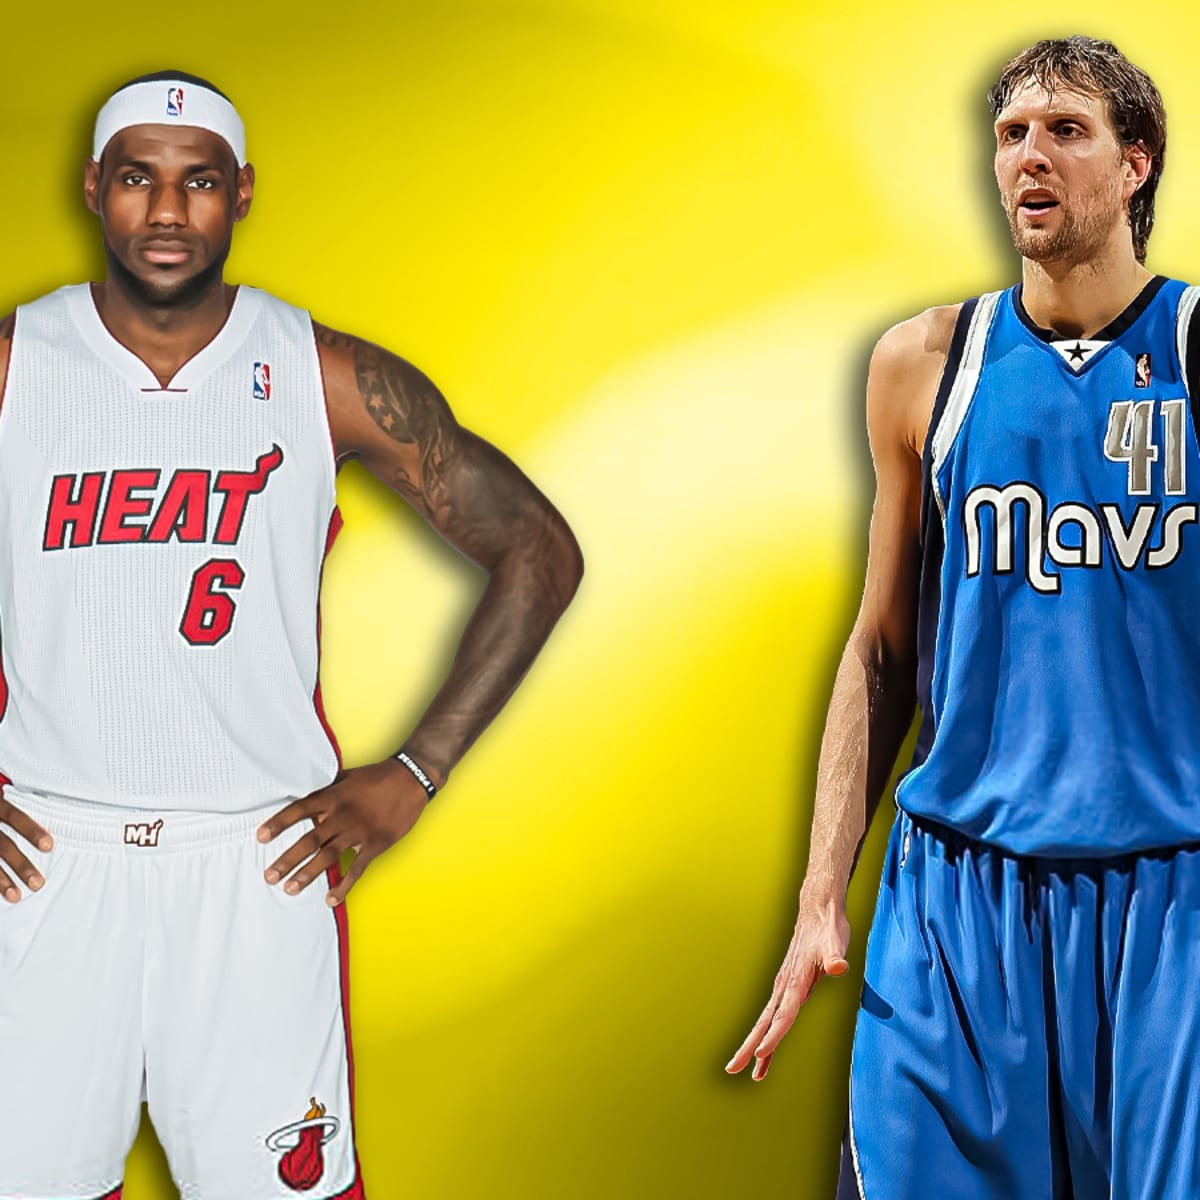 They probably would have beat us handily - Dirk Nowitzki recalls his tough  battles with LeBron James-led 'Heatles' in 2011 NBA Finals